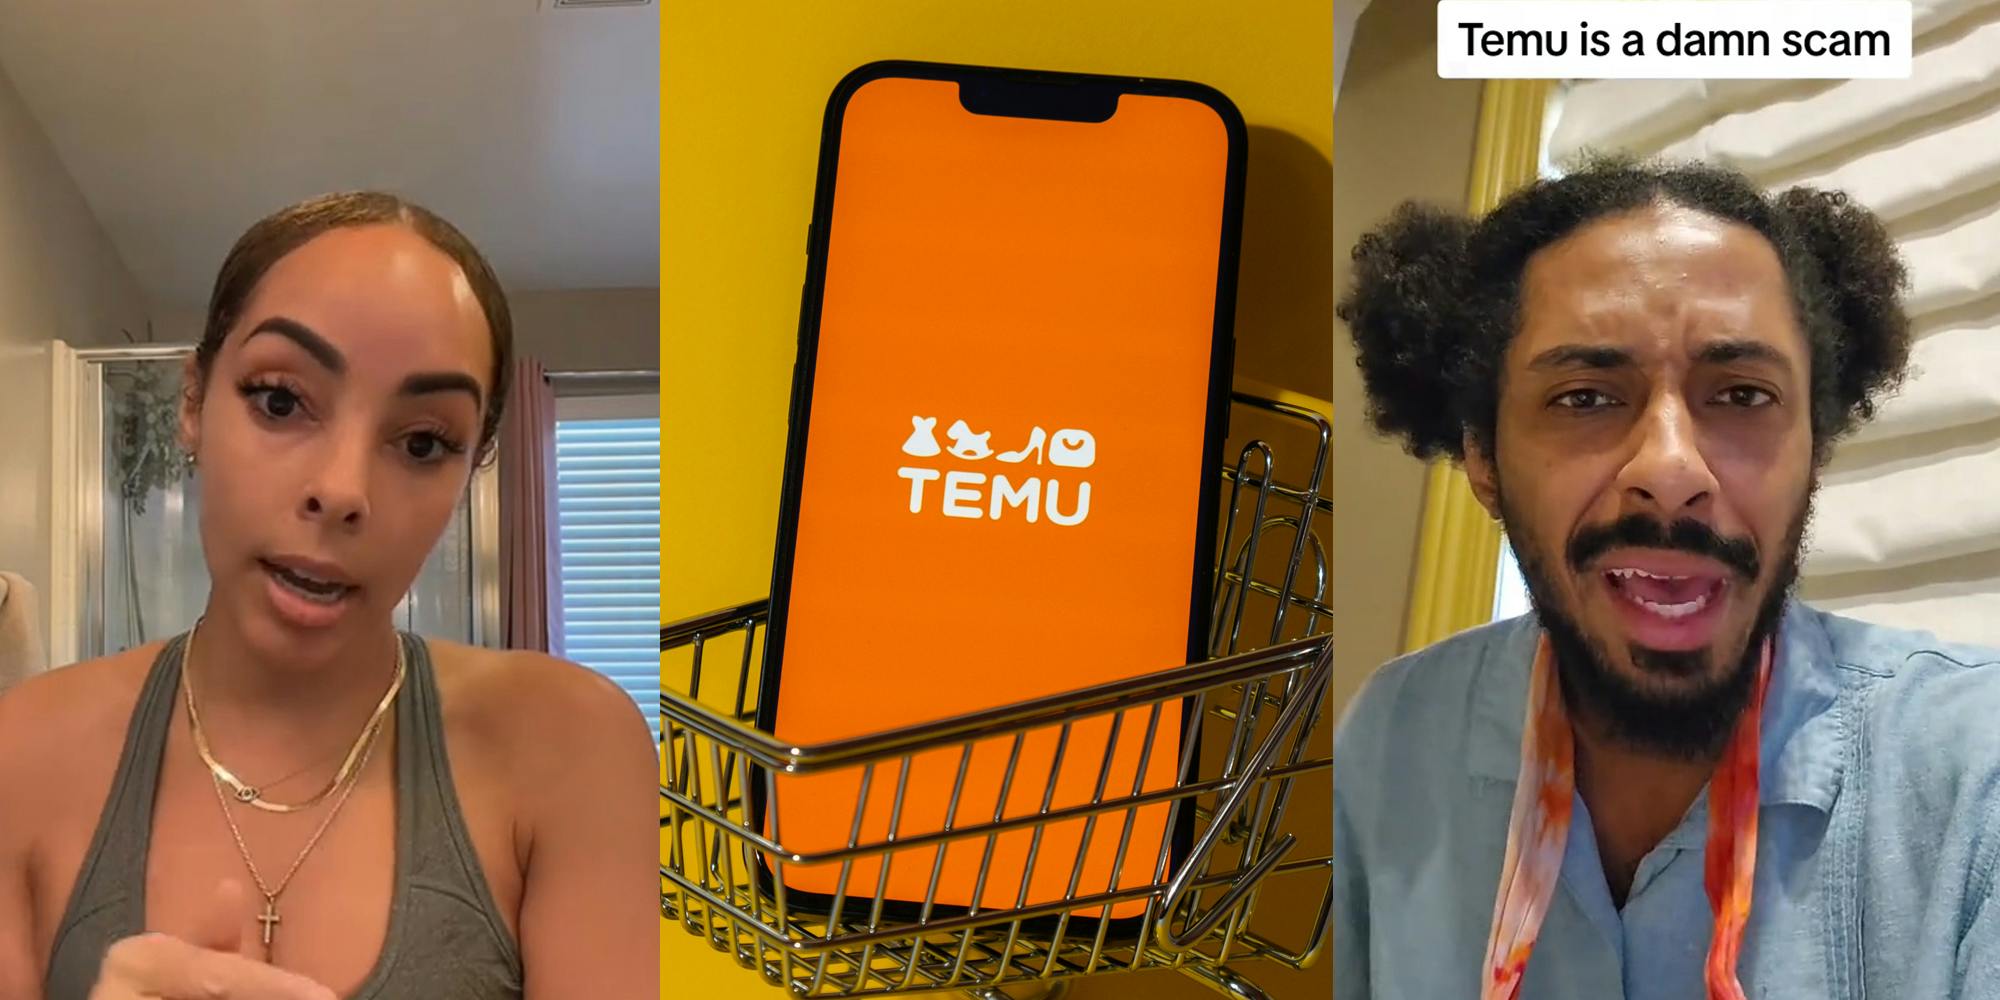 Temu customer speaking (l) Temu app on phone screen in shopping cart in front of yellow background (c) Temu customer's son speaking with caption "Temu is a damn scam" (r)